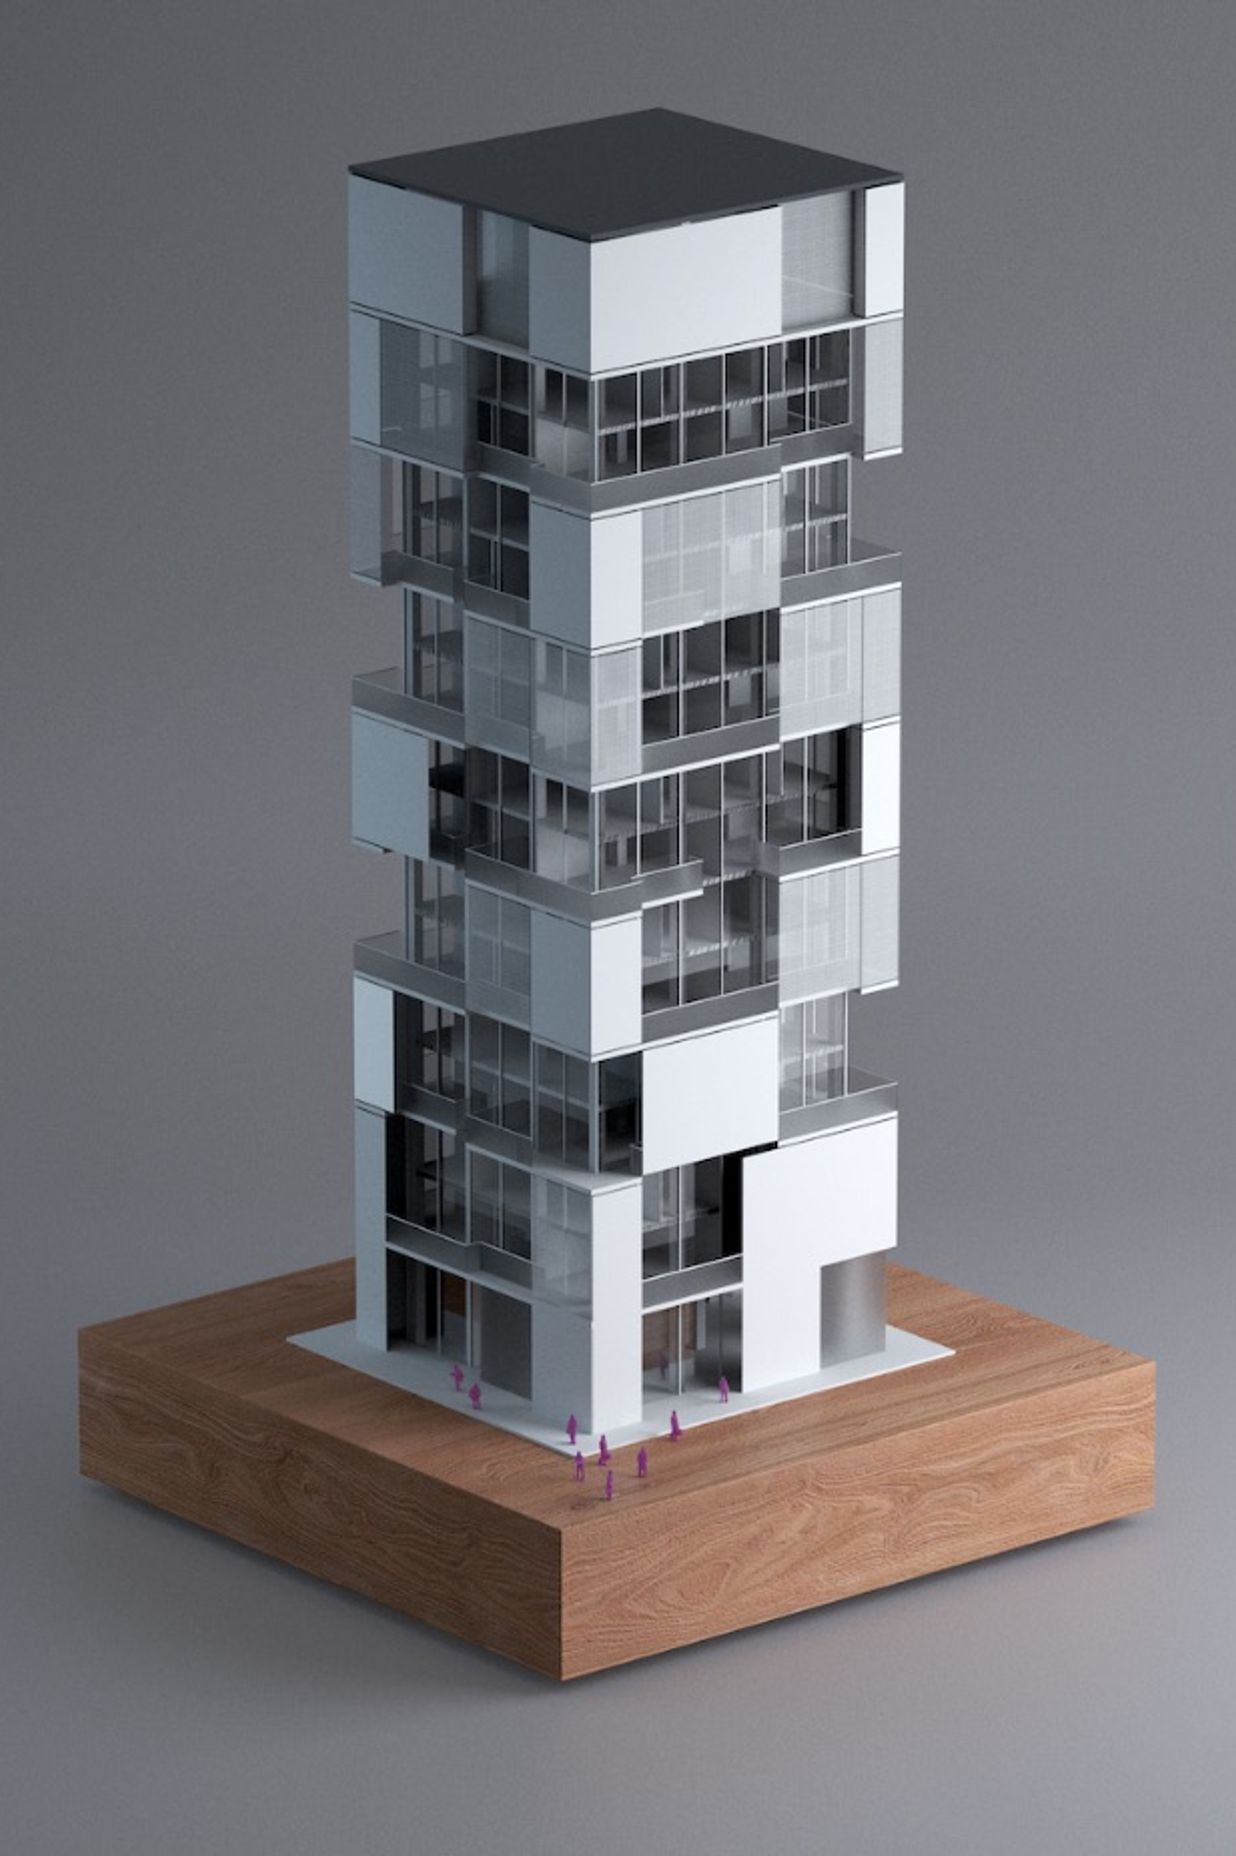 Single apartment tower